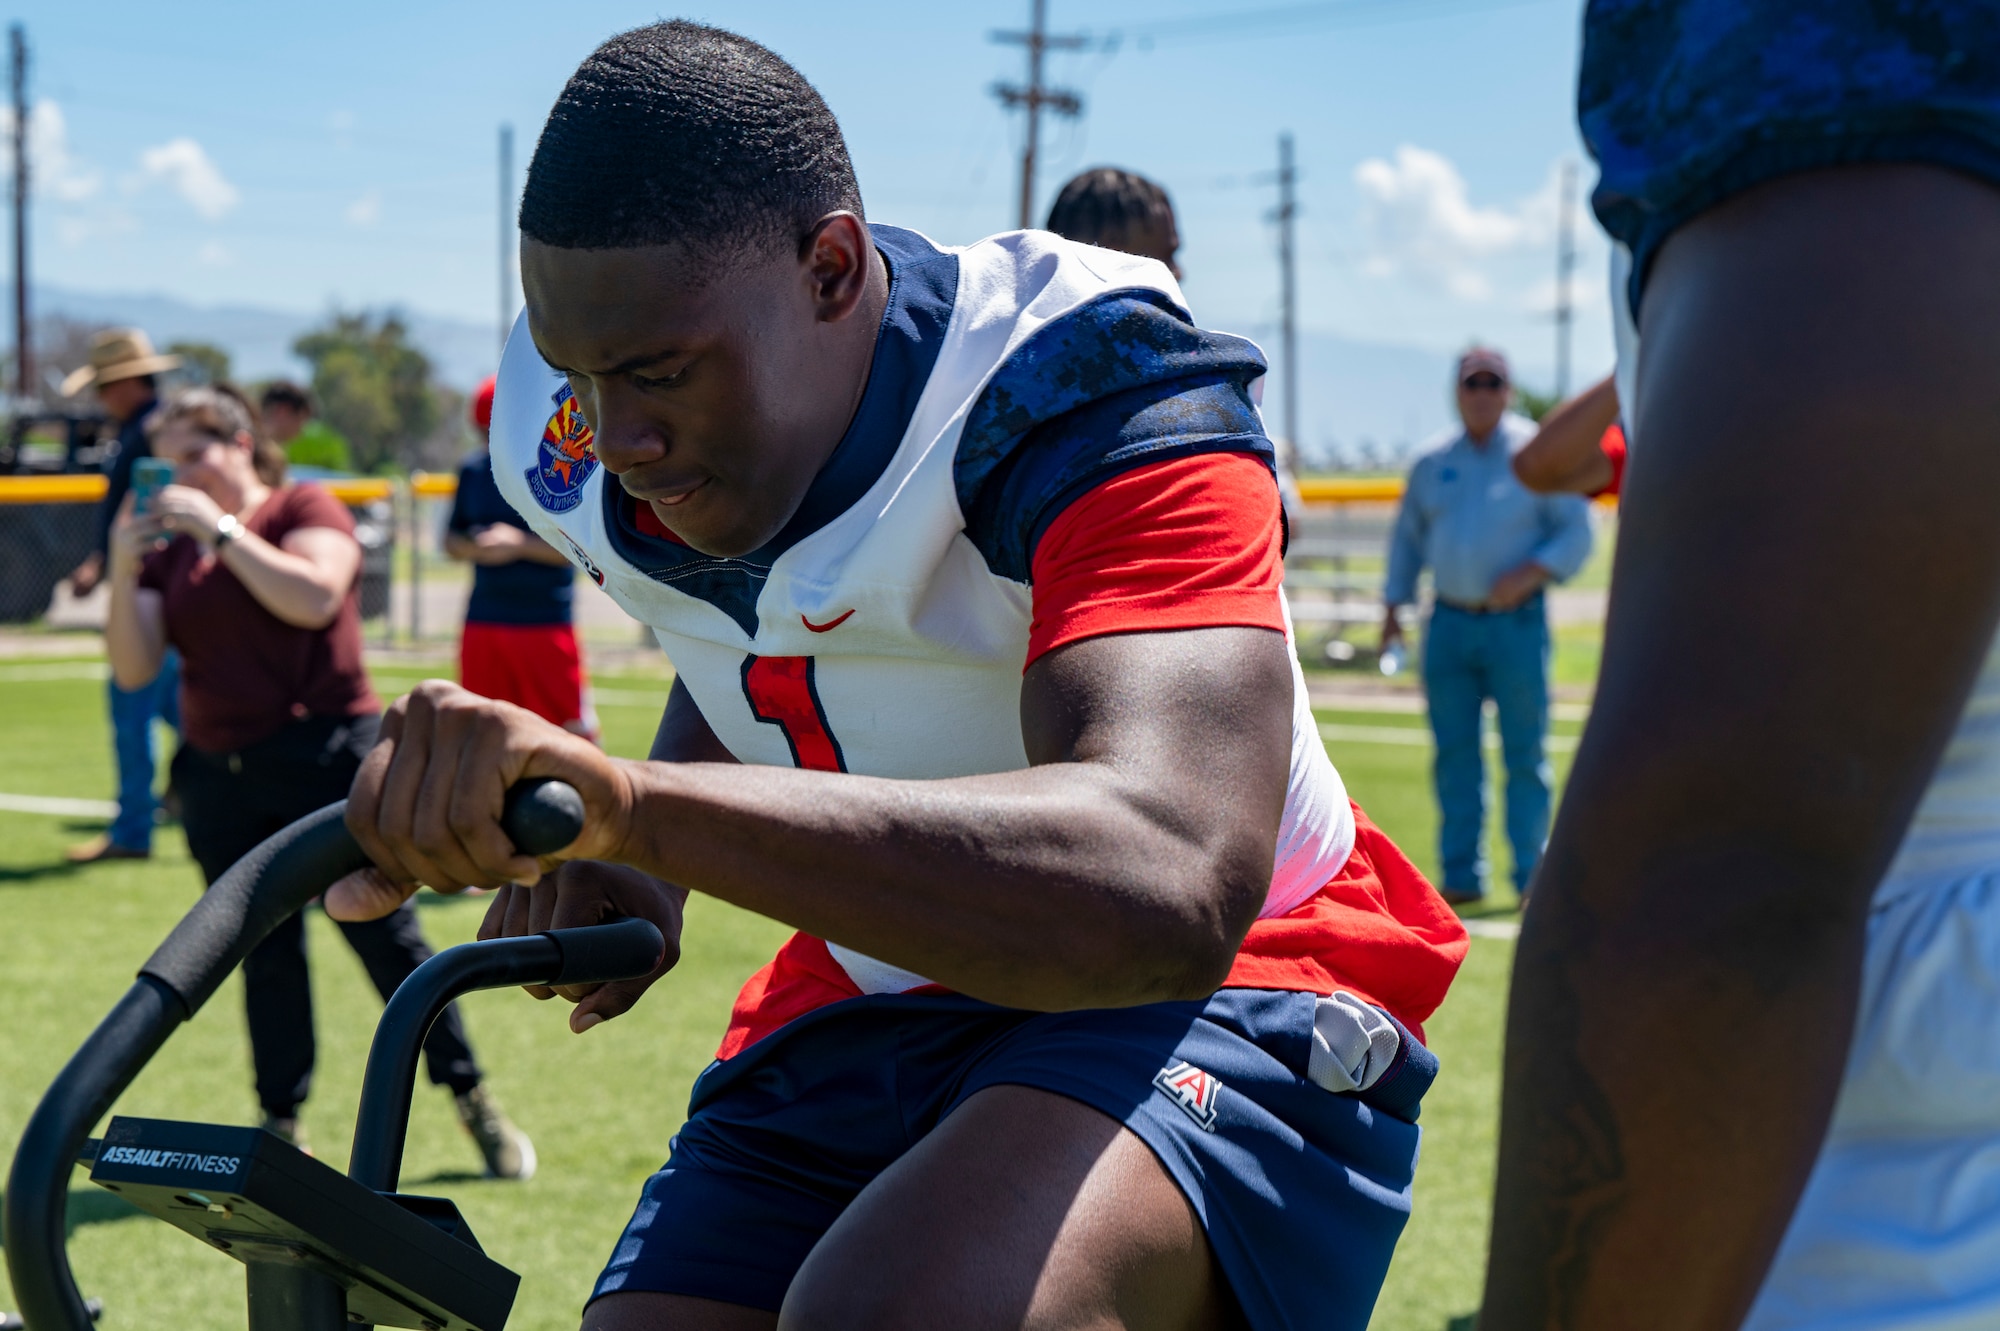 UofA player works out on an exercise bike